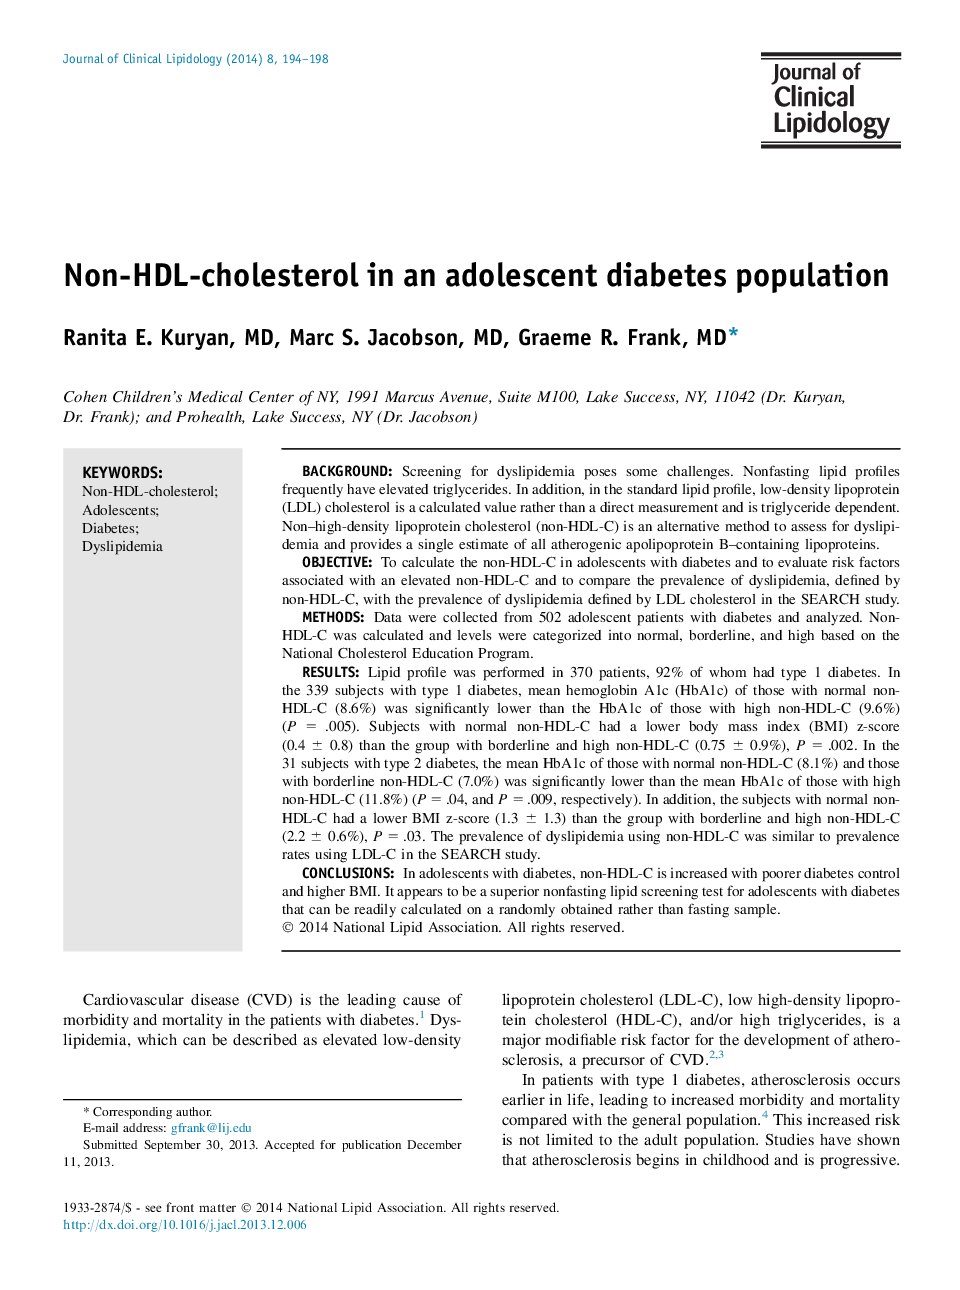 Non-HDL-cholesterol in an adolescent diabetes population